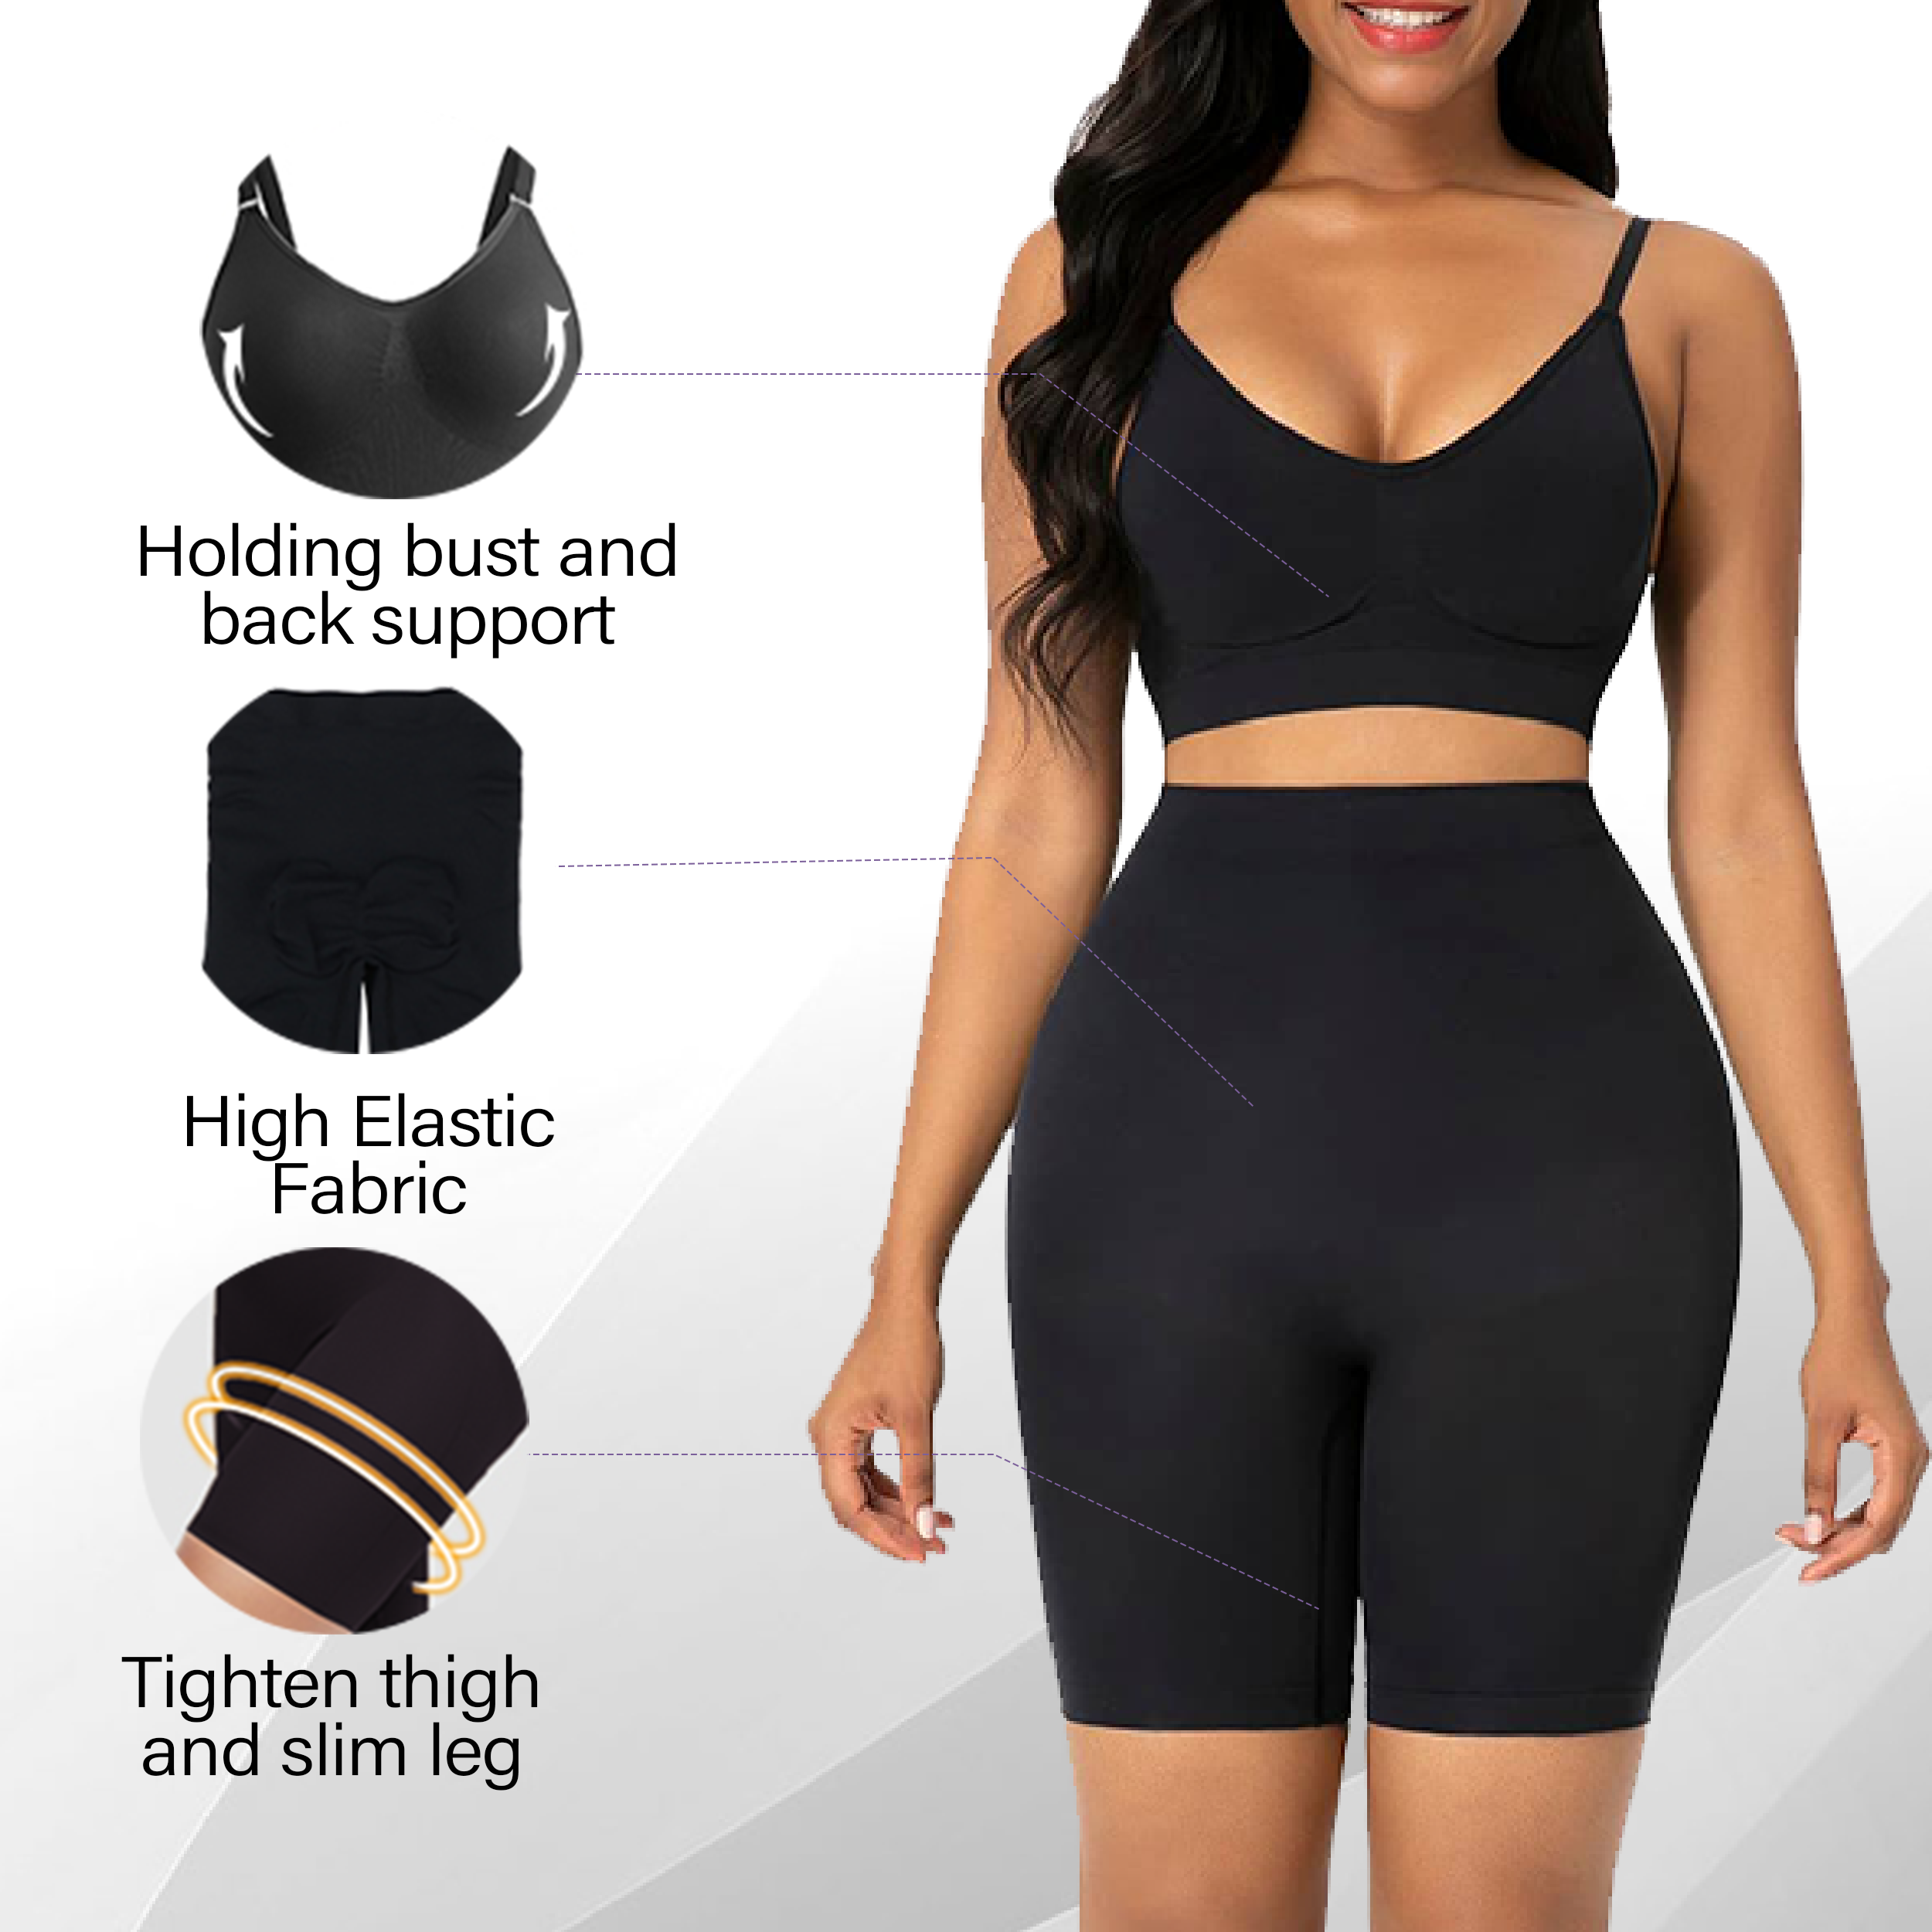 Women's Seamless Bodysuit Shapewear With Tummy Control, Waist Cincher And  Butt Lifter, Adjustable Straps, Stretchy Slimming Shorts